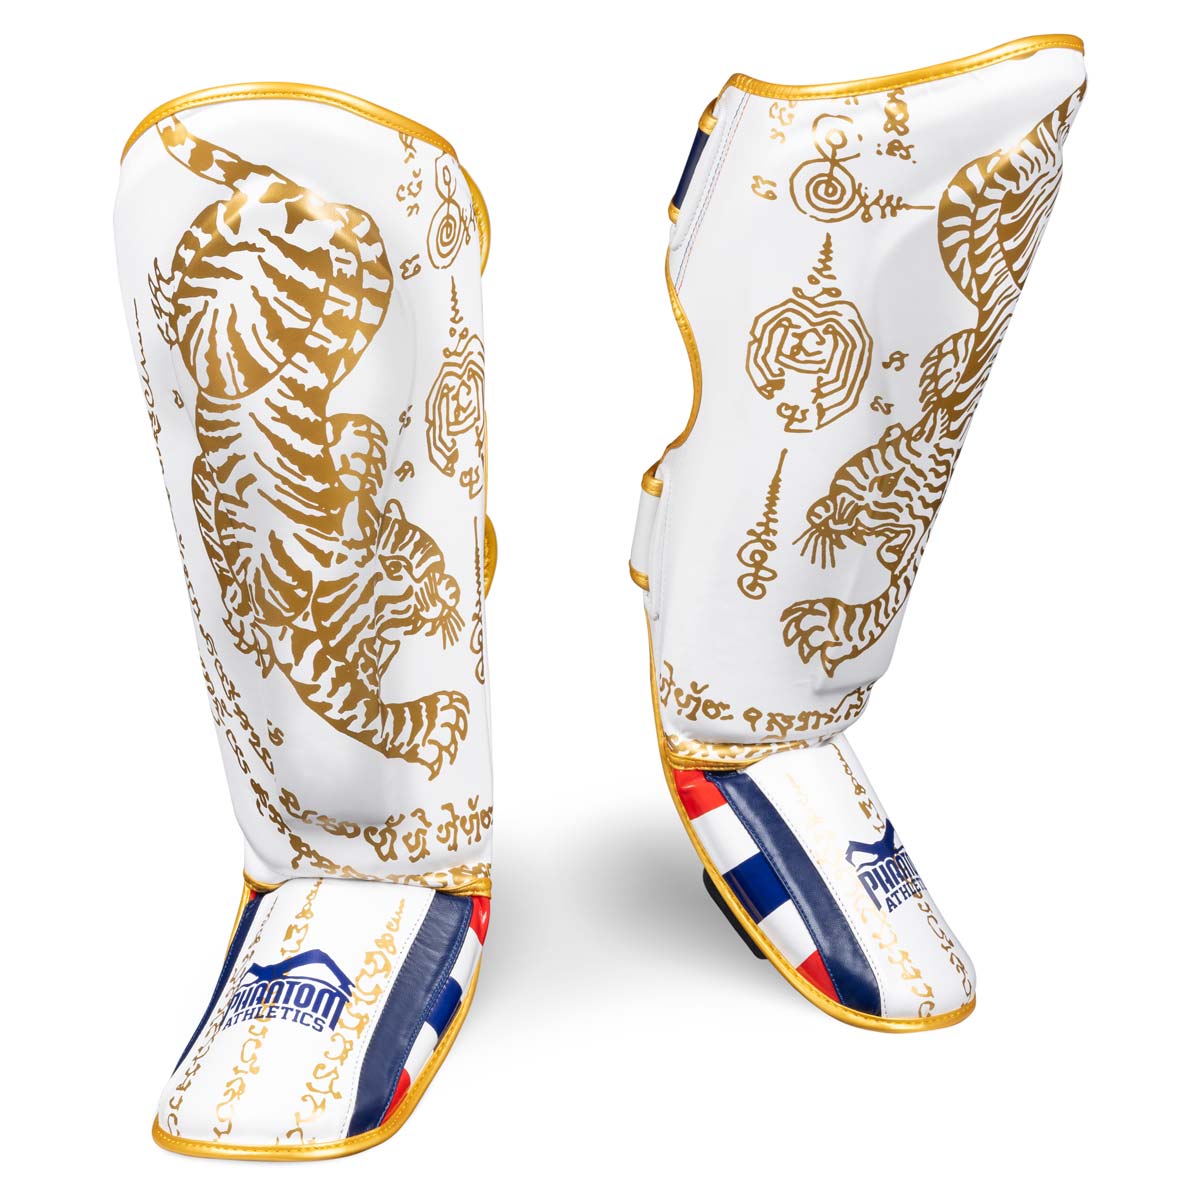 Phantom Muay Thai shin guard for Thai boxing and MMA sparring, competition and training. In the traditional Sak Yant design and the limited color white/gold.